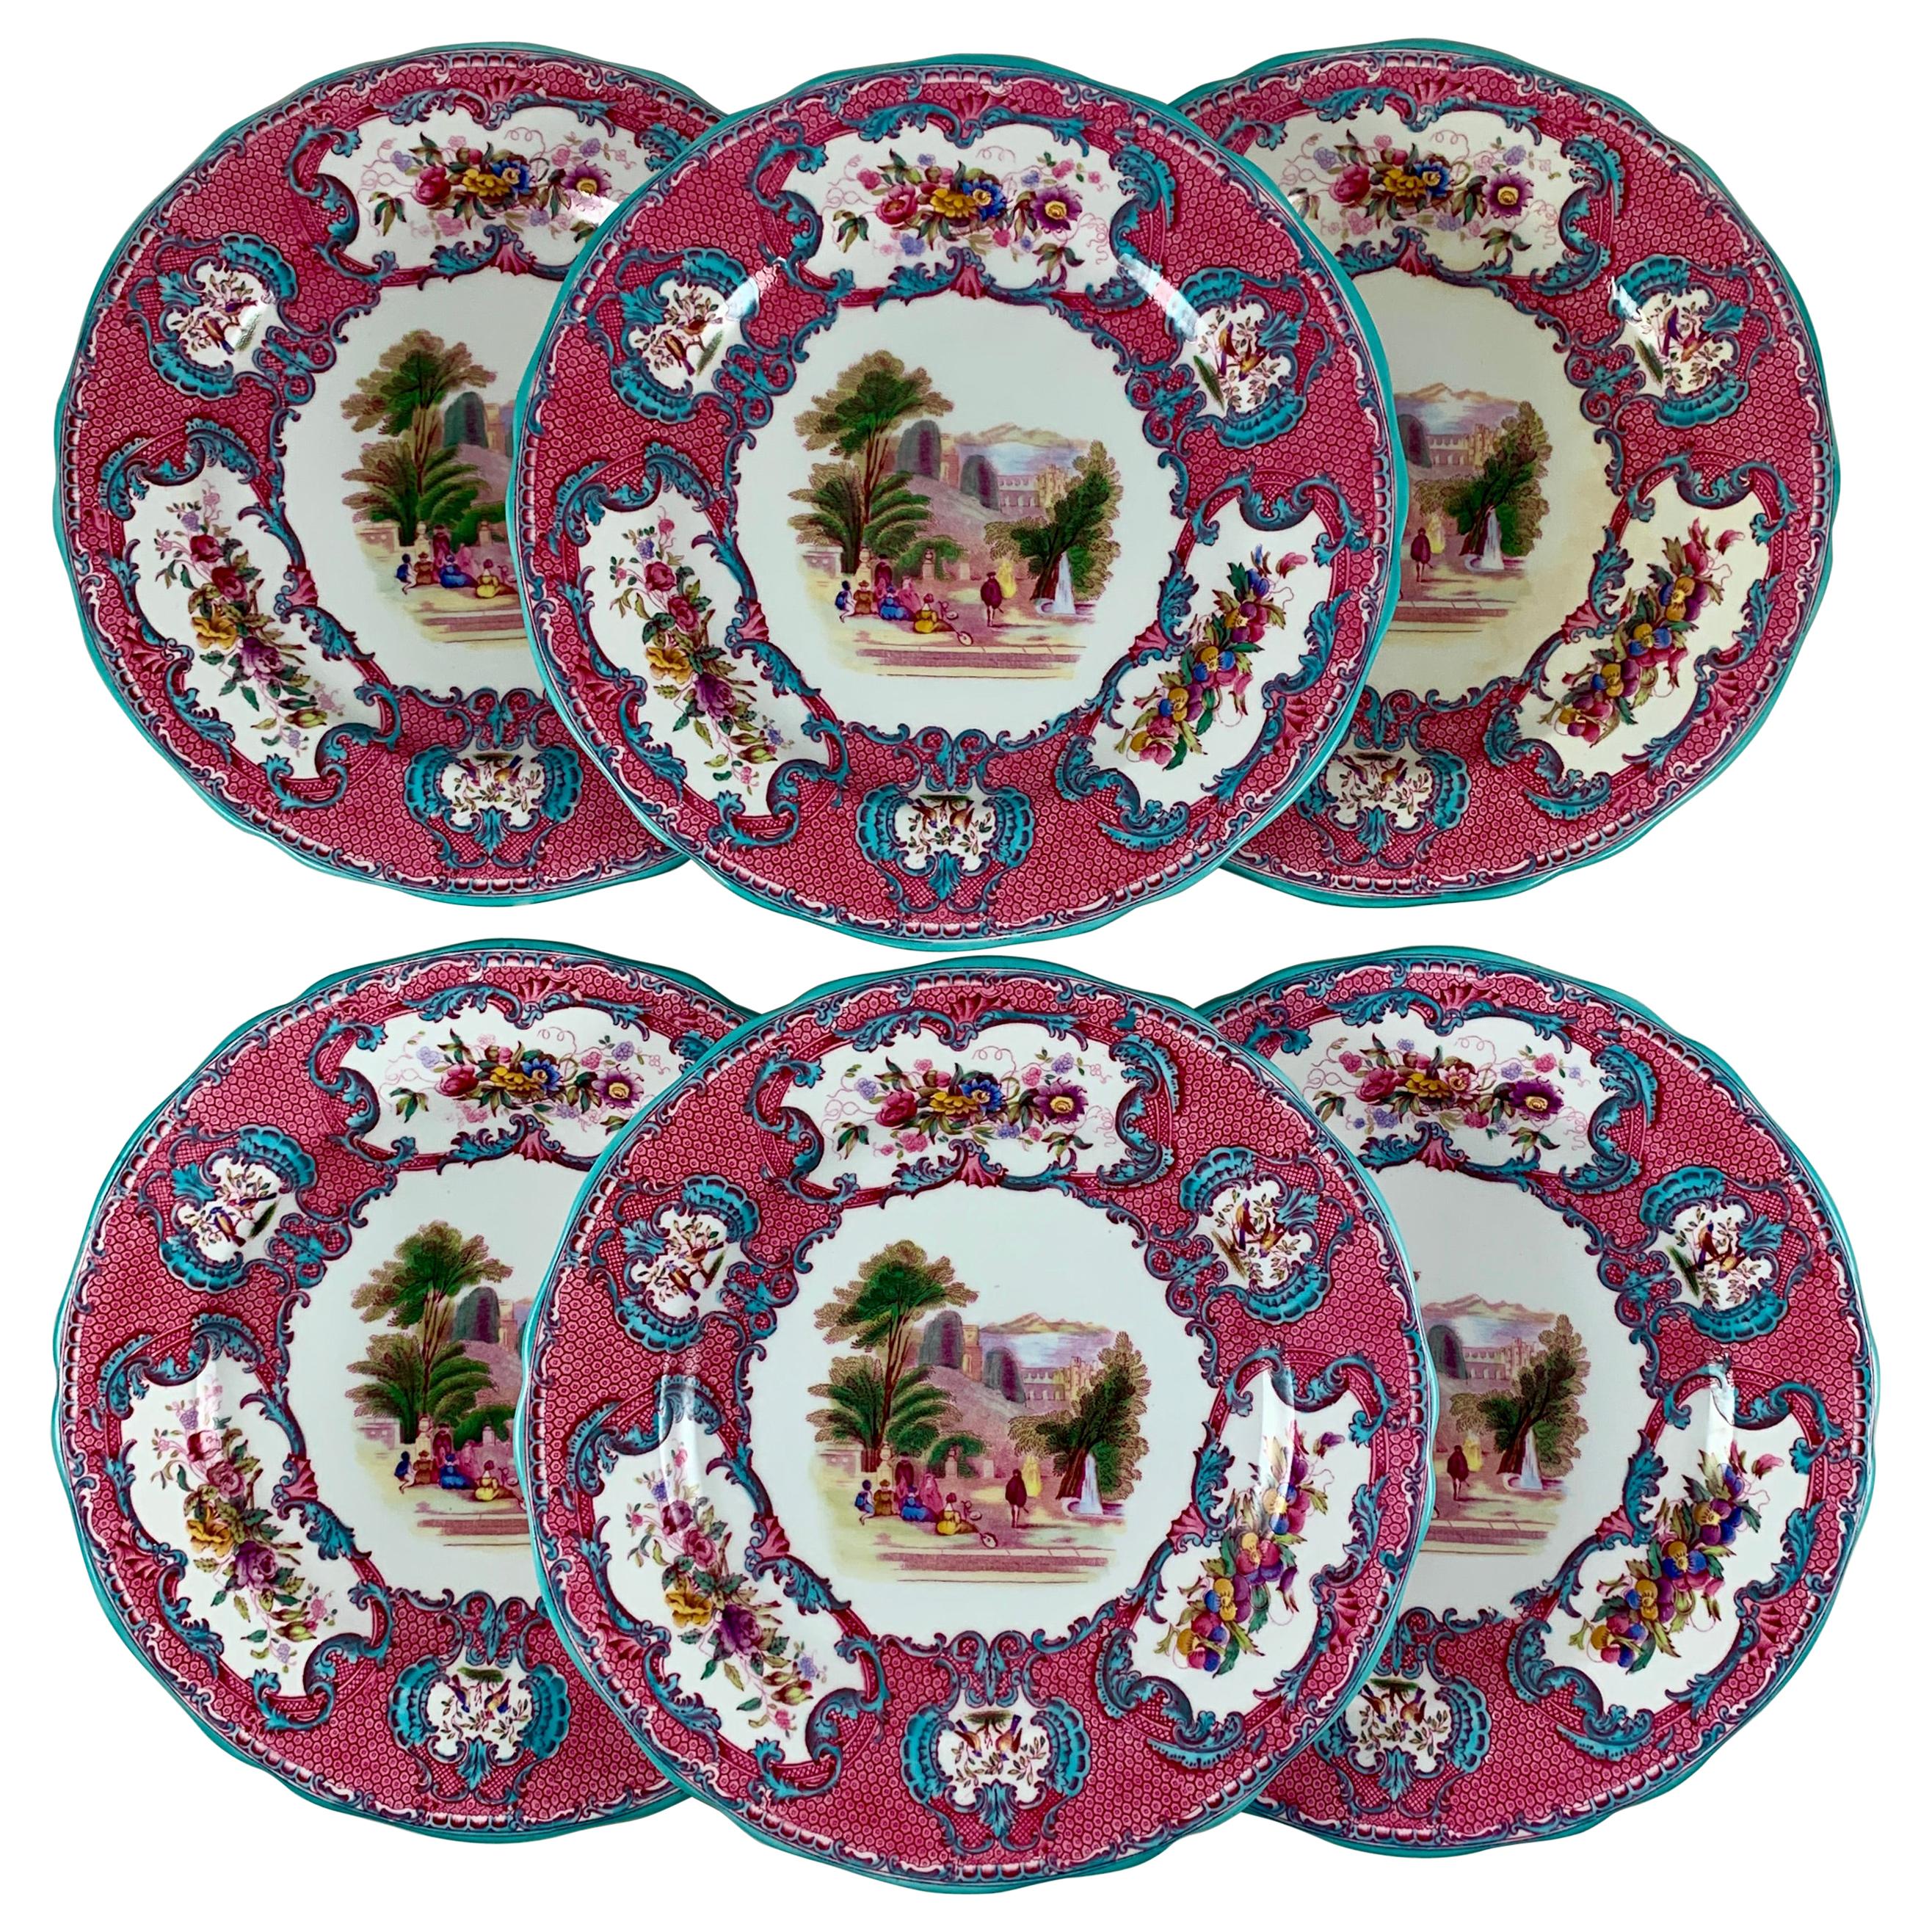 Copeland Spode Queen Mary Rococo Pink Porcelain Plates for Tiffany & Co. Set / 6